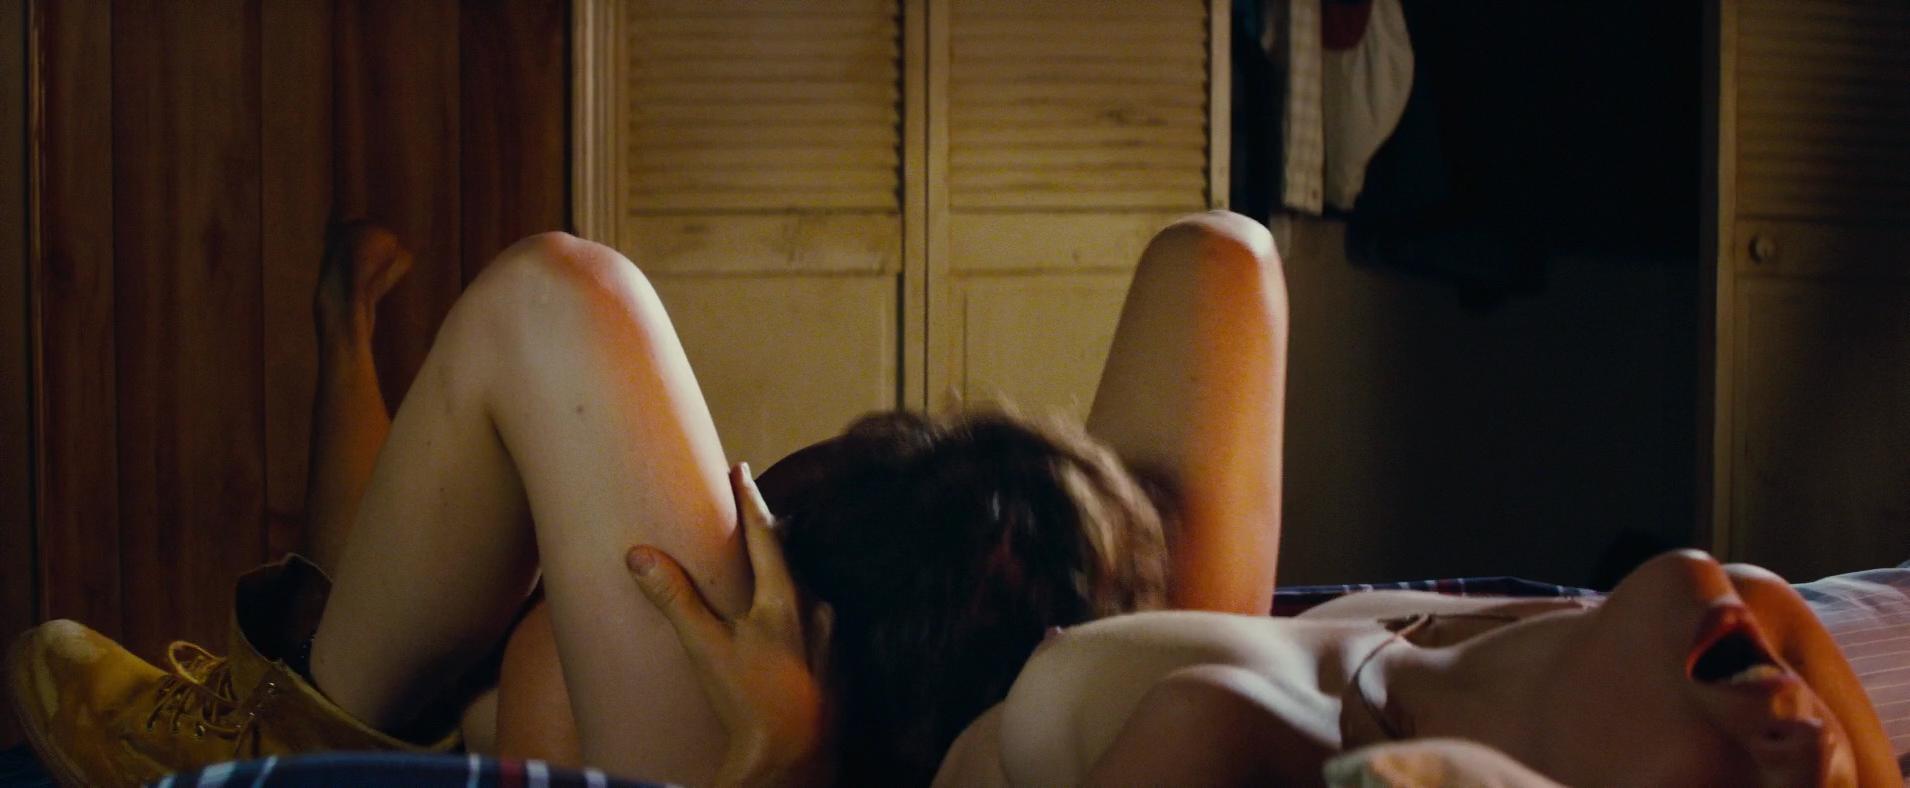 Sara Canning, Louise Robinson naked – The Right Kind Of Wrong (2013)